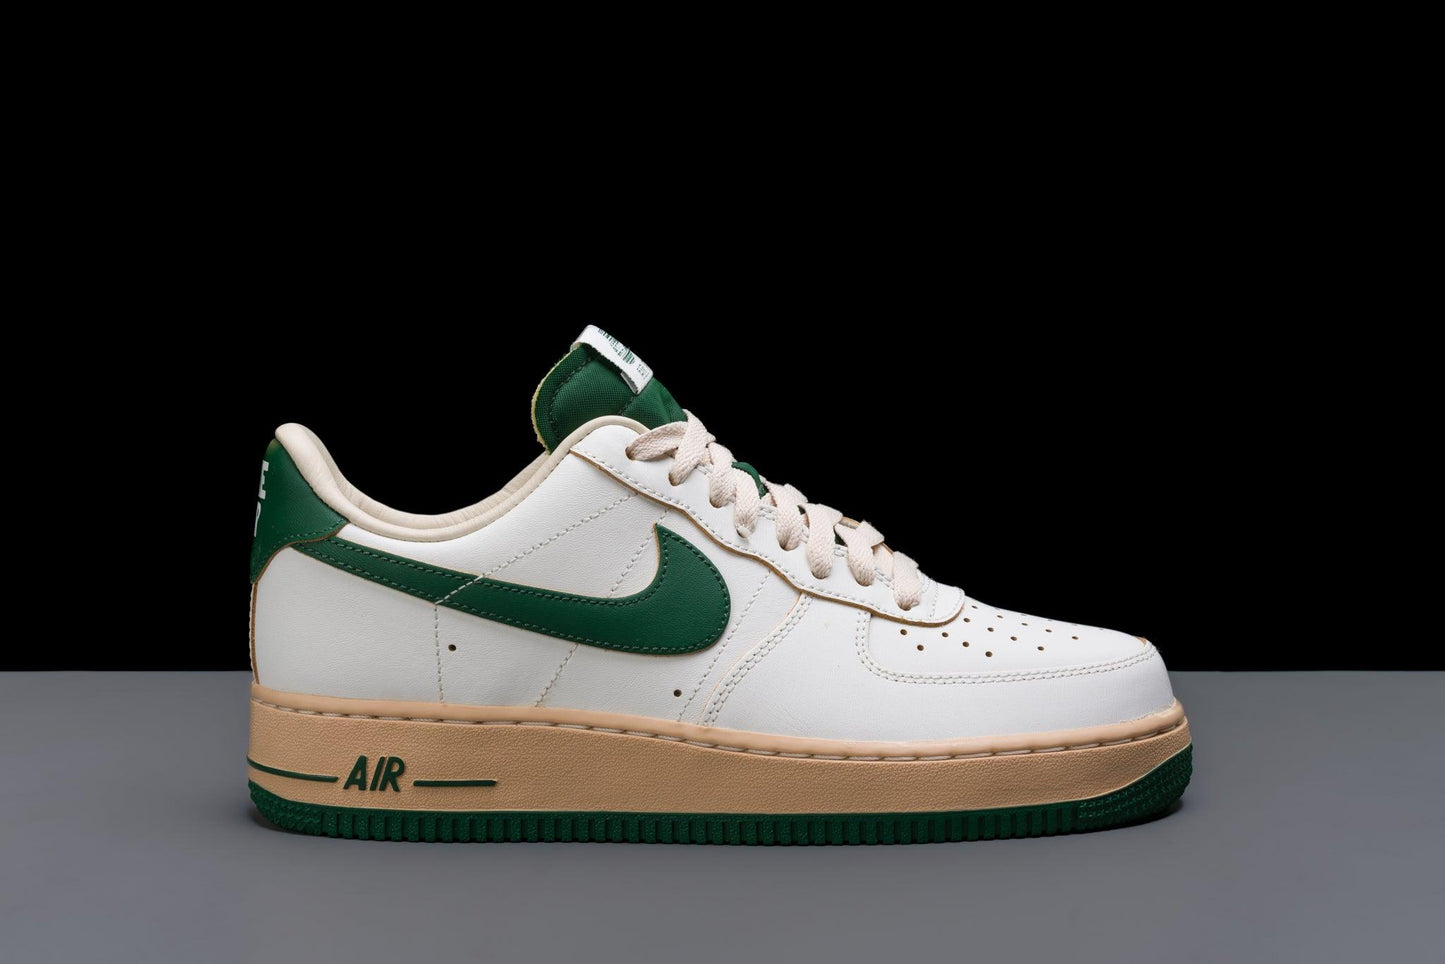 nike air force 1 low vintage gorge green lo10m 1 1445x